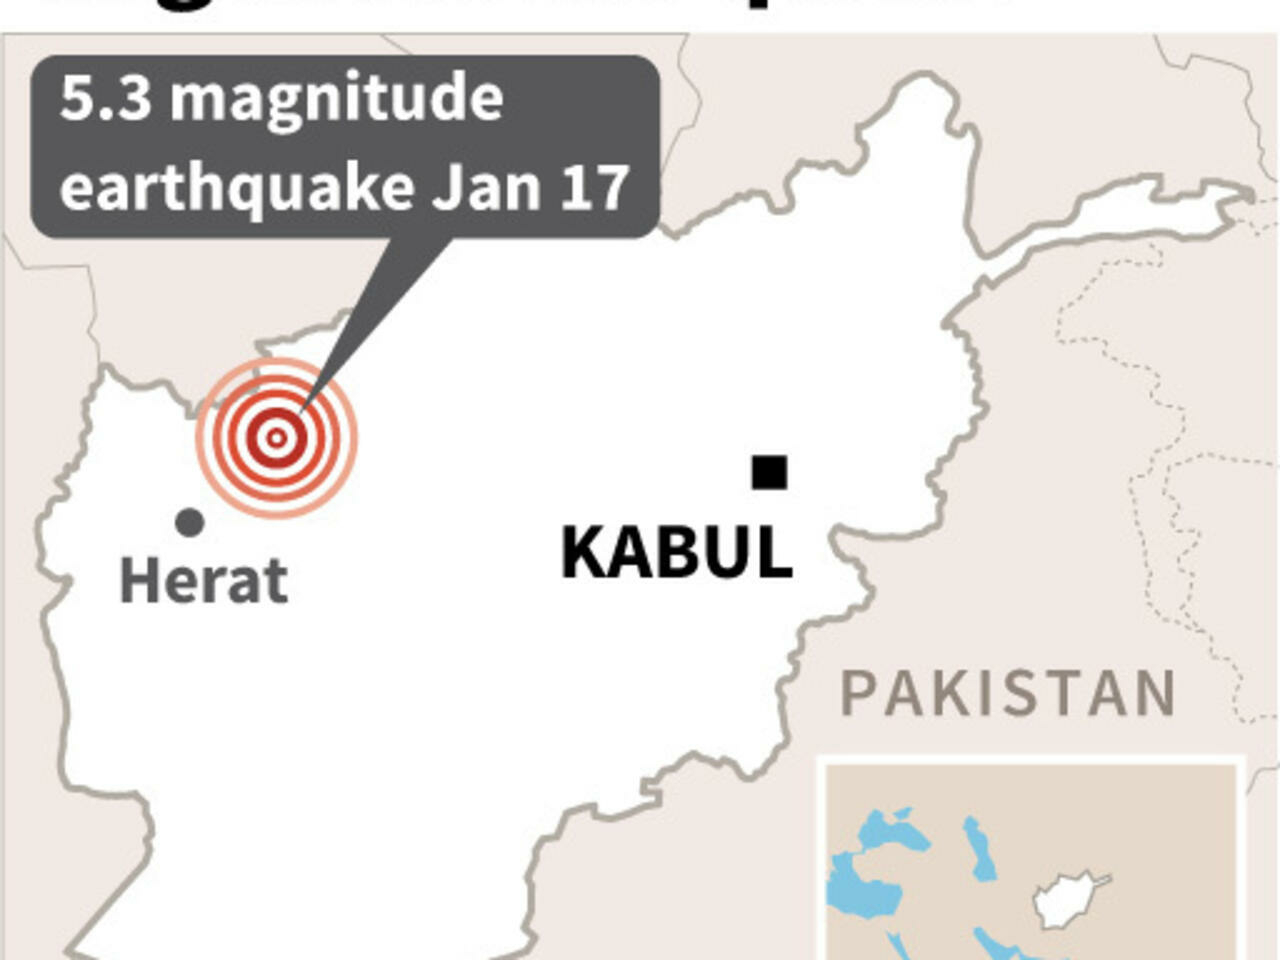 At least 12 killed in Afghan earthquake, says official